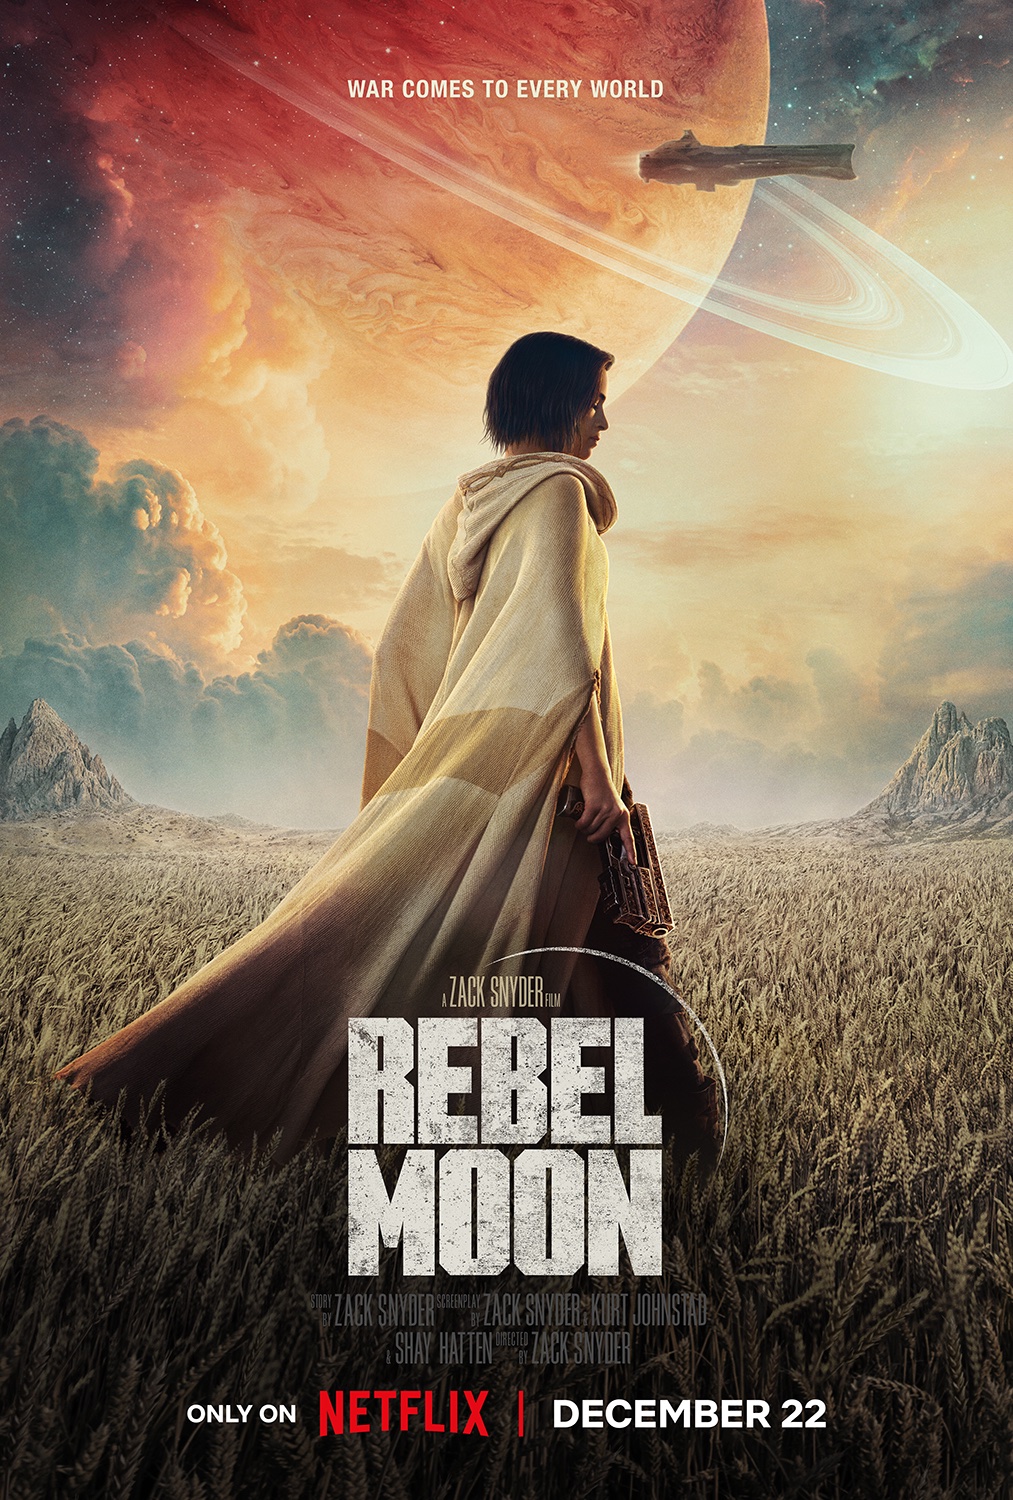 Snyder Netflix Updates ⚒️ rebel moon era on X: A new subtitle for REBEL  MOON: part 1 (a menina do fogo // The child [girl] of fire) has been  revealed by Netflix